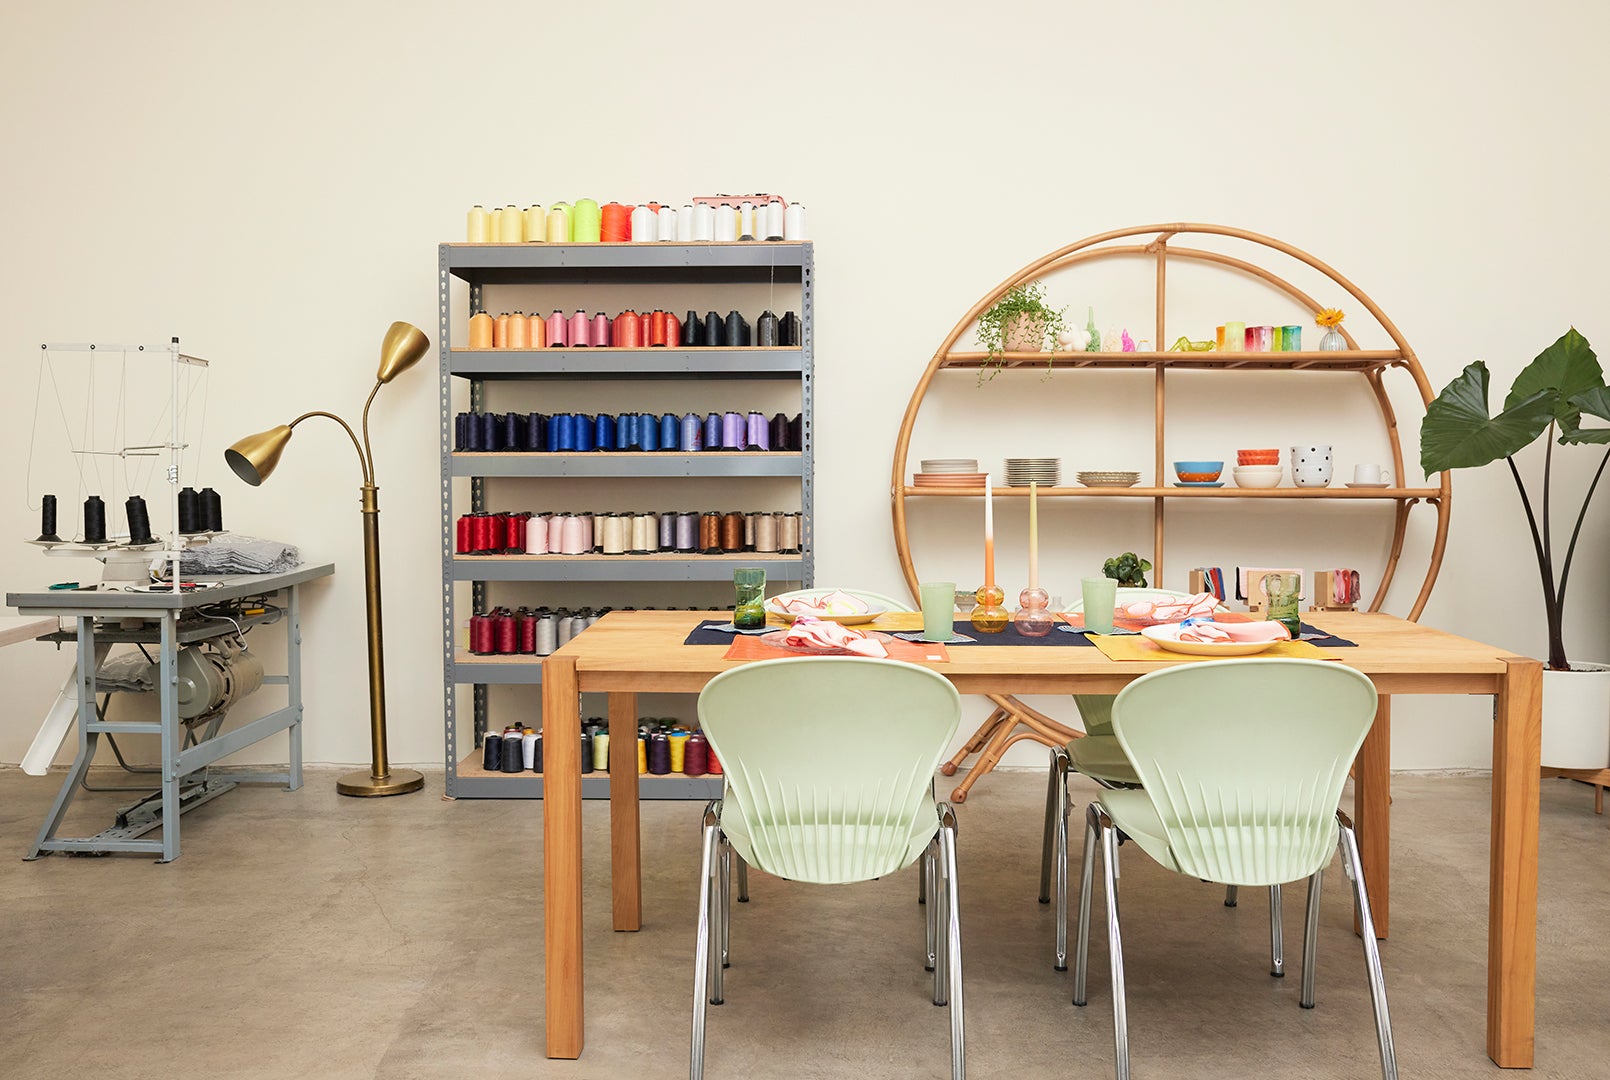 Rainbow-Colored Dining Chairs Are the Centerpiece of This L.A. Workspace